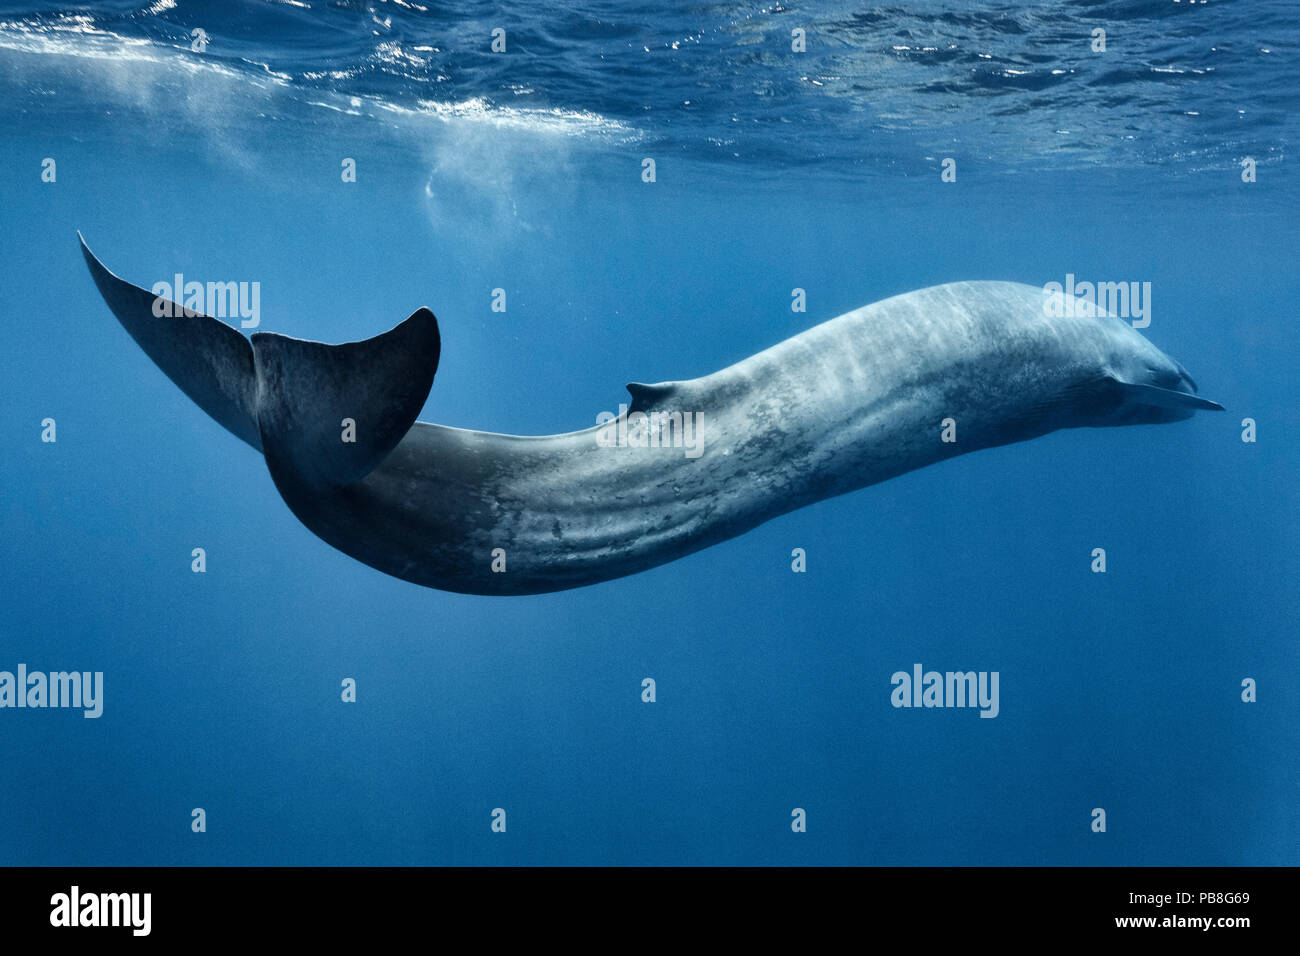 Blue whale (Balaenoptera musculus) swimming in s motion, Sri Lanka, Indian Ocean. Stock Photo